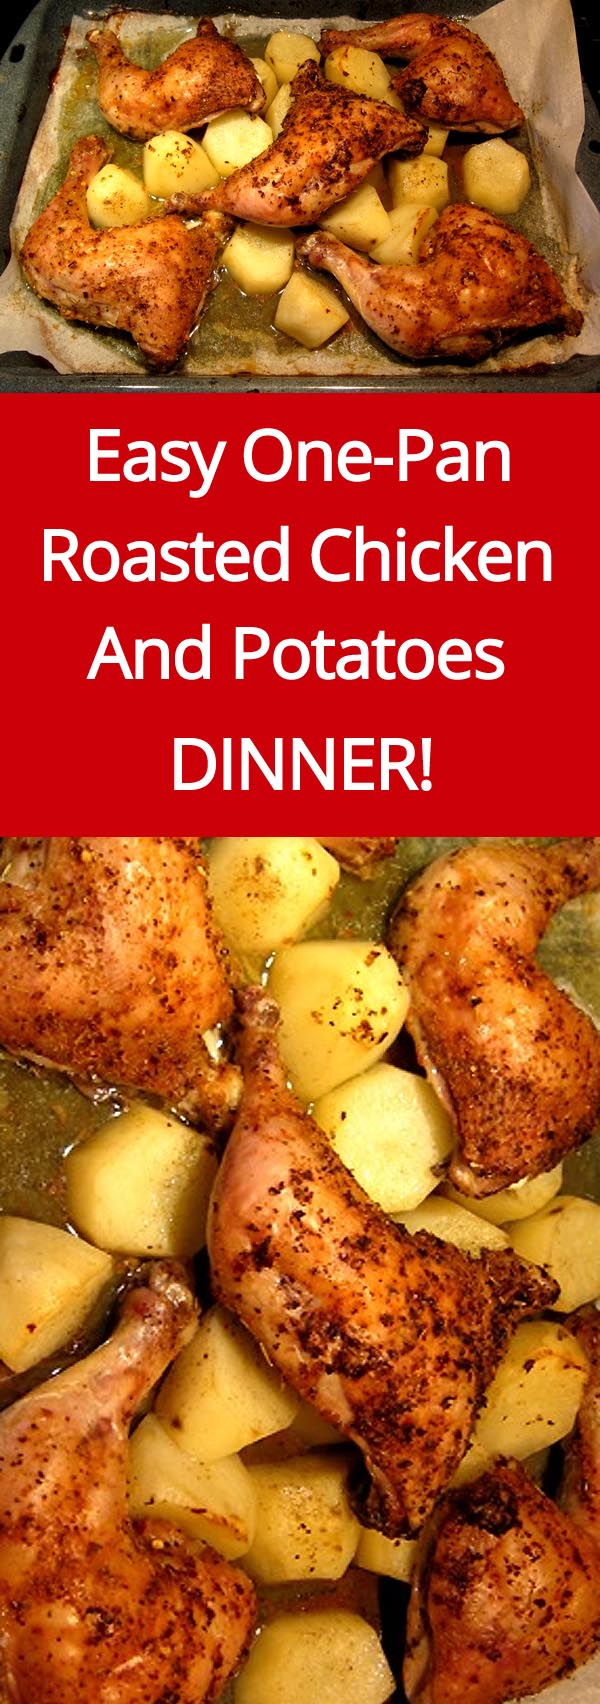 Easy One-Pan Roasted Chicken And Potatoes Recipe | MelanieCooks.com